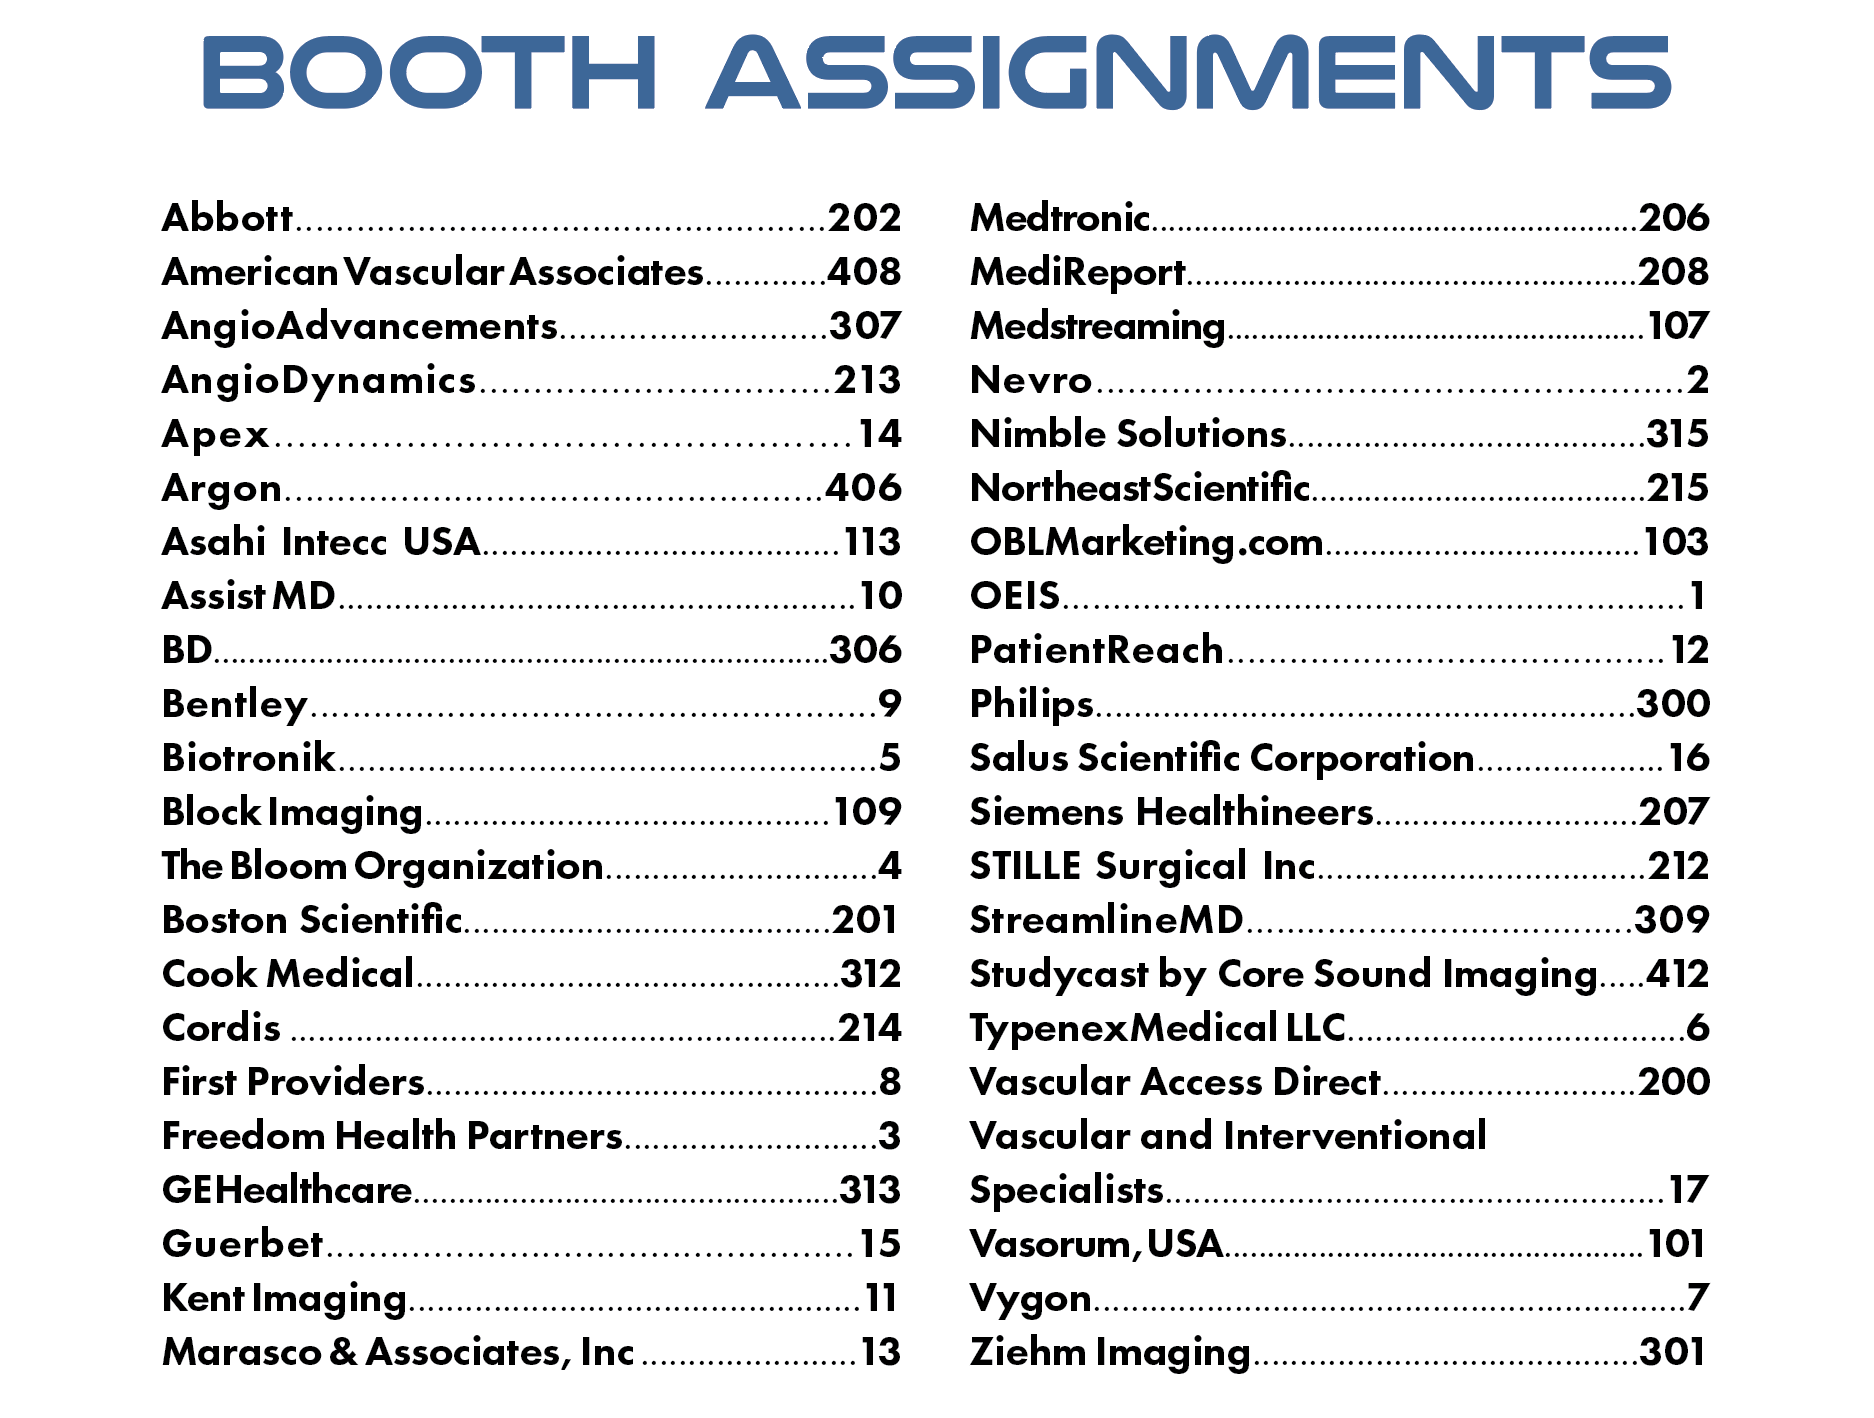 Annual Meeting booth assignments.